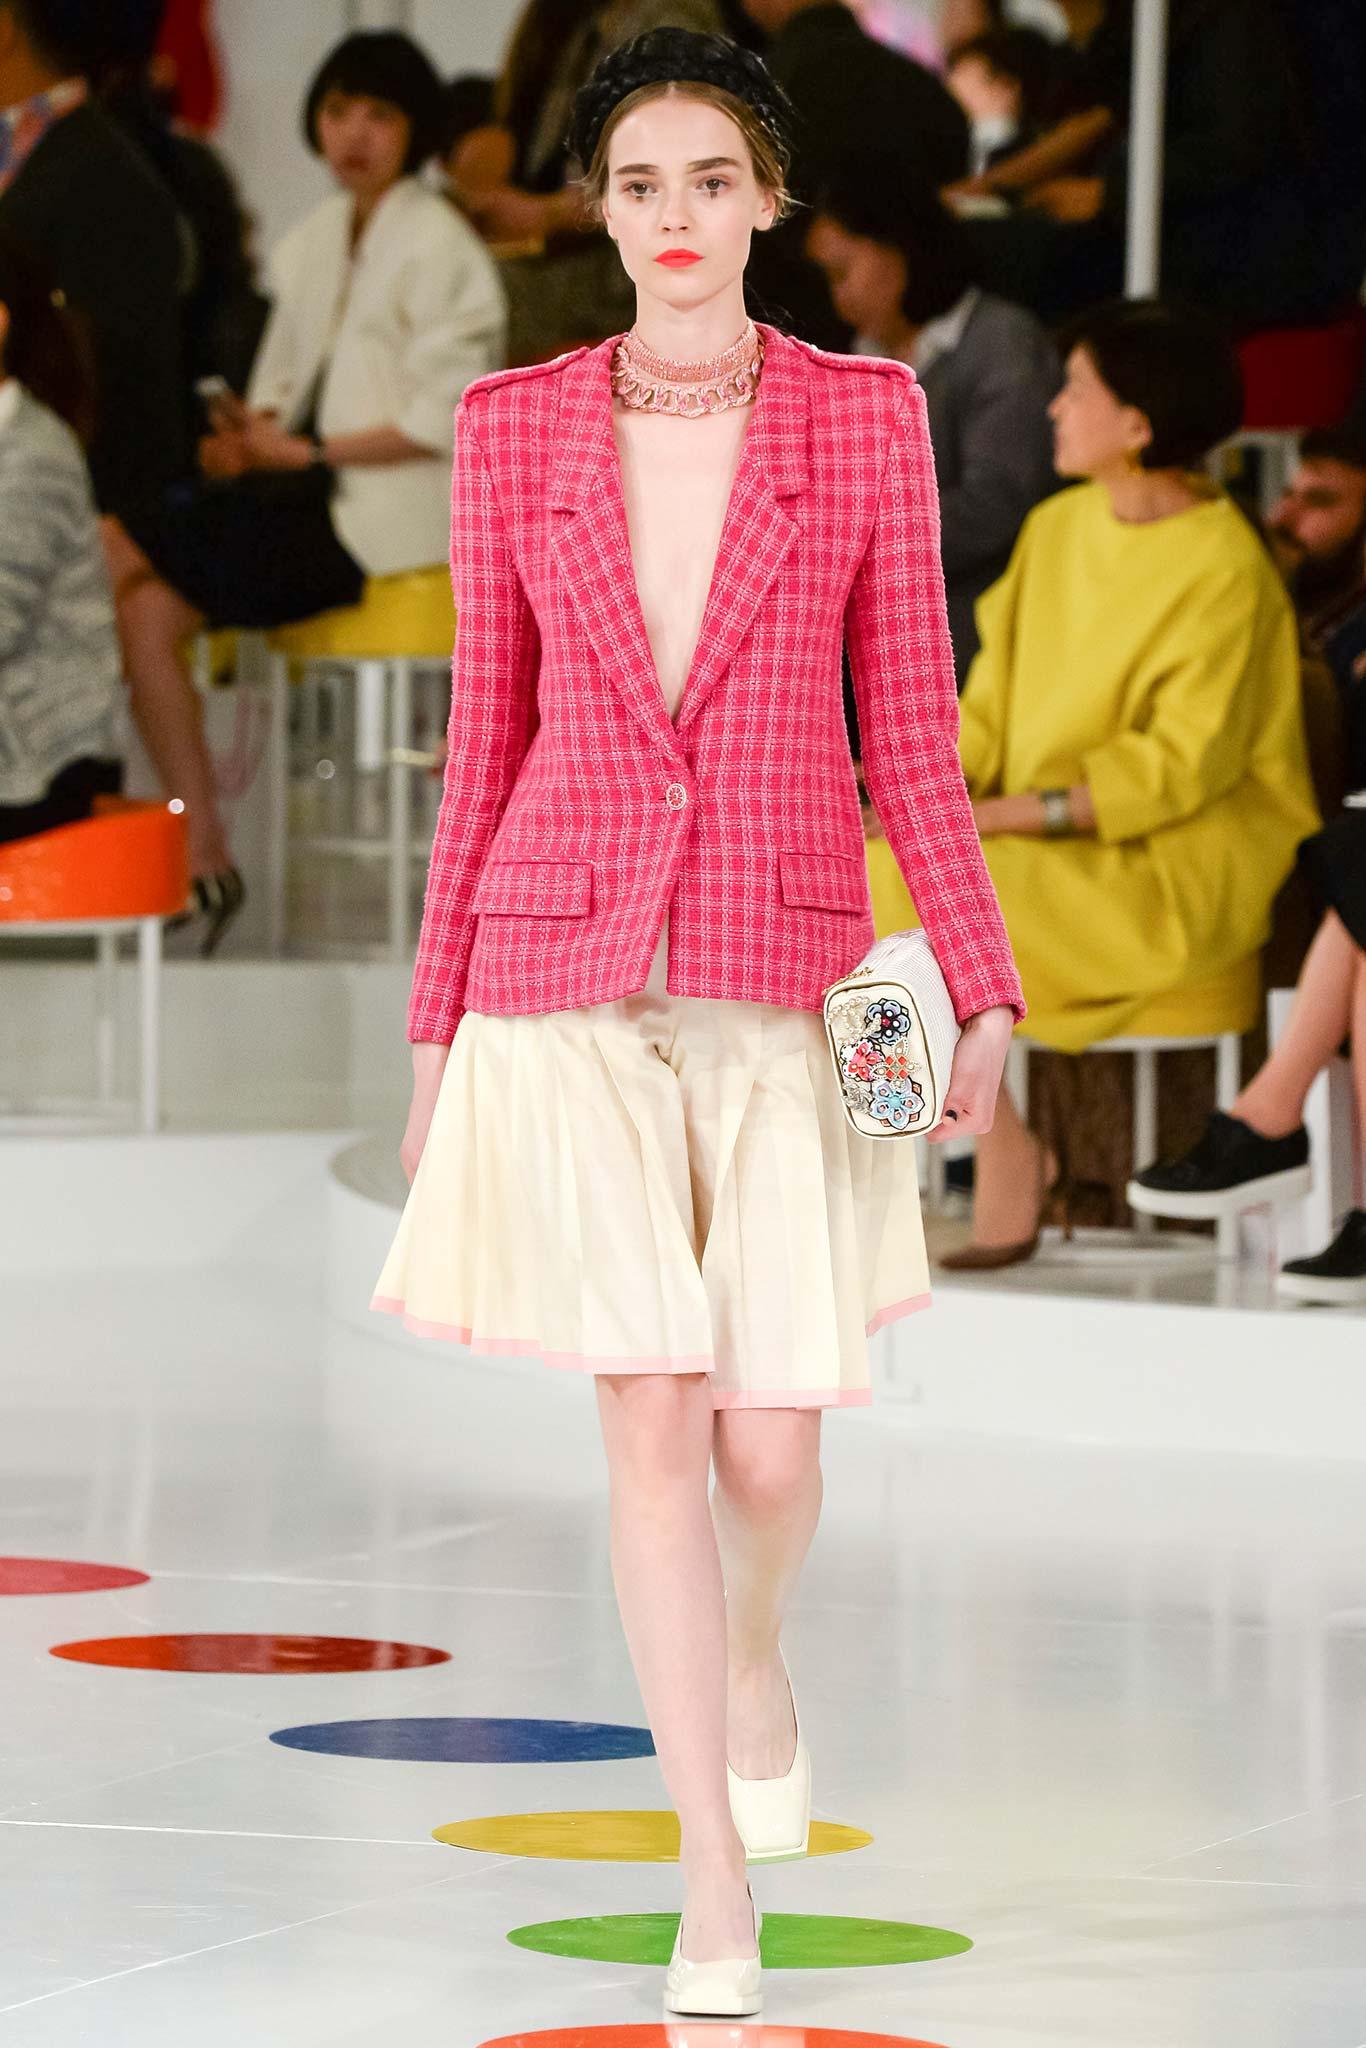 New Chanel tweed jacket in trendiest fuchsia pink colour from Paris / Seoul Cruise Collection by Karl Lagerfeld, as seen in Ad Campaign.
Size mark 46 FR. Kept unworn.
Gorgeous ecru/pink CC camellia buttons at front and at cuffs. Very beautiful